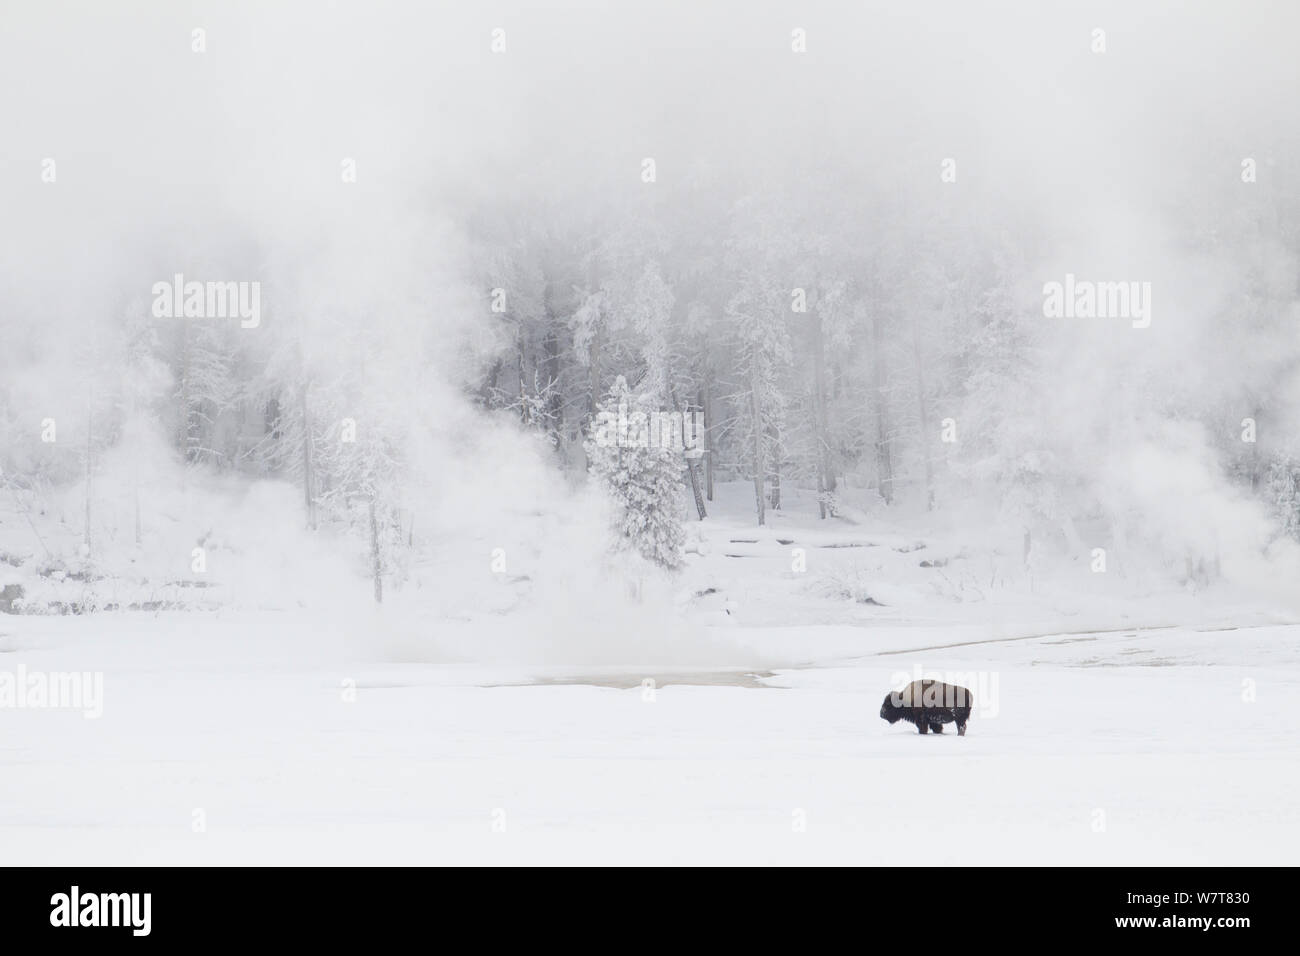 American Bison (Bison bison) standing in front of winter geysers, Yellowstone National Park, Wyoming, USA, February 2013.. Stock Photo